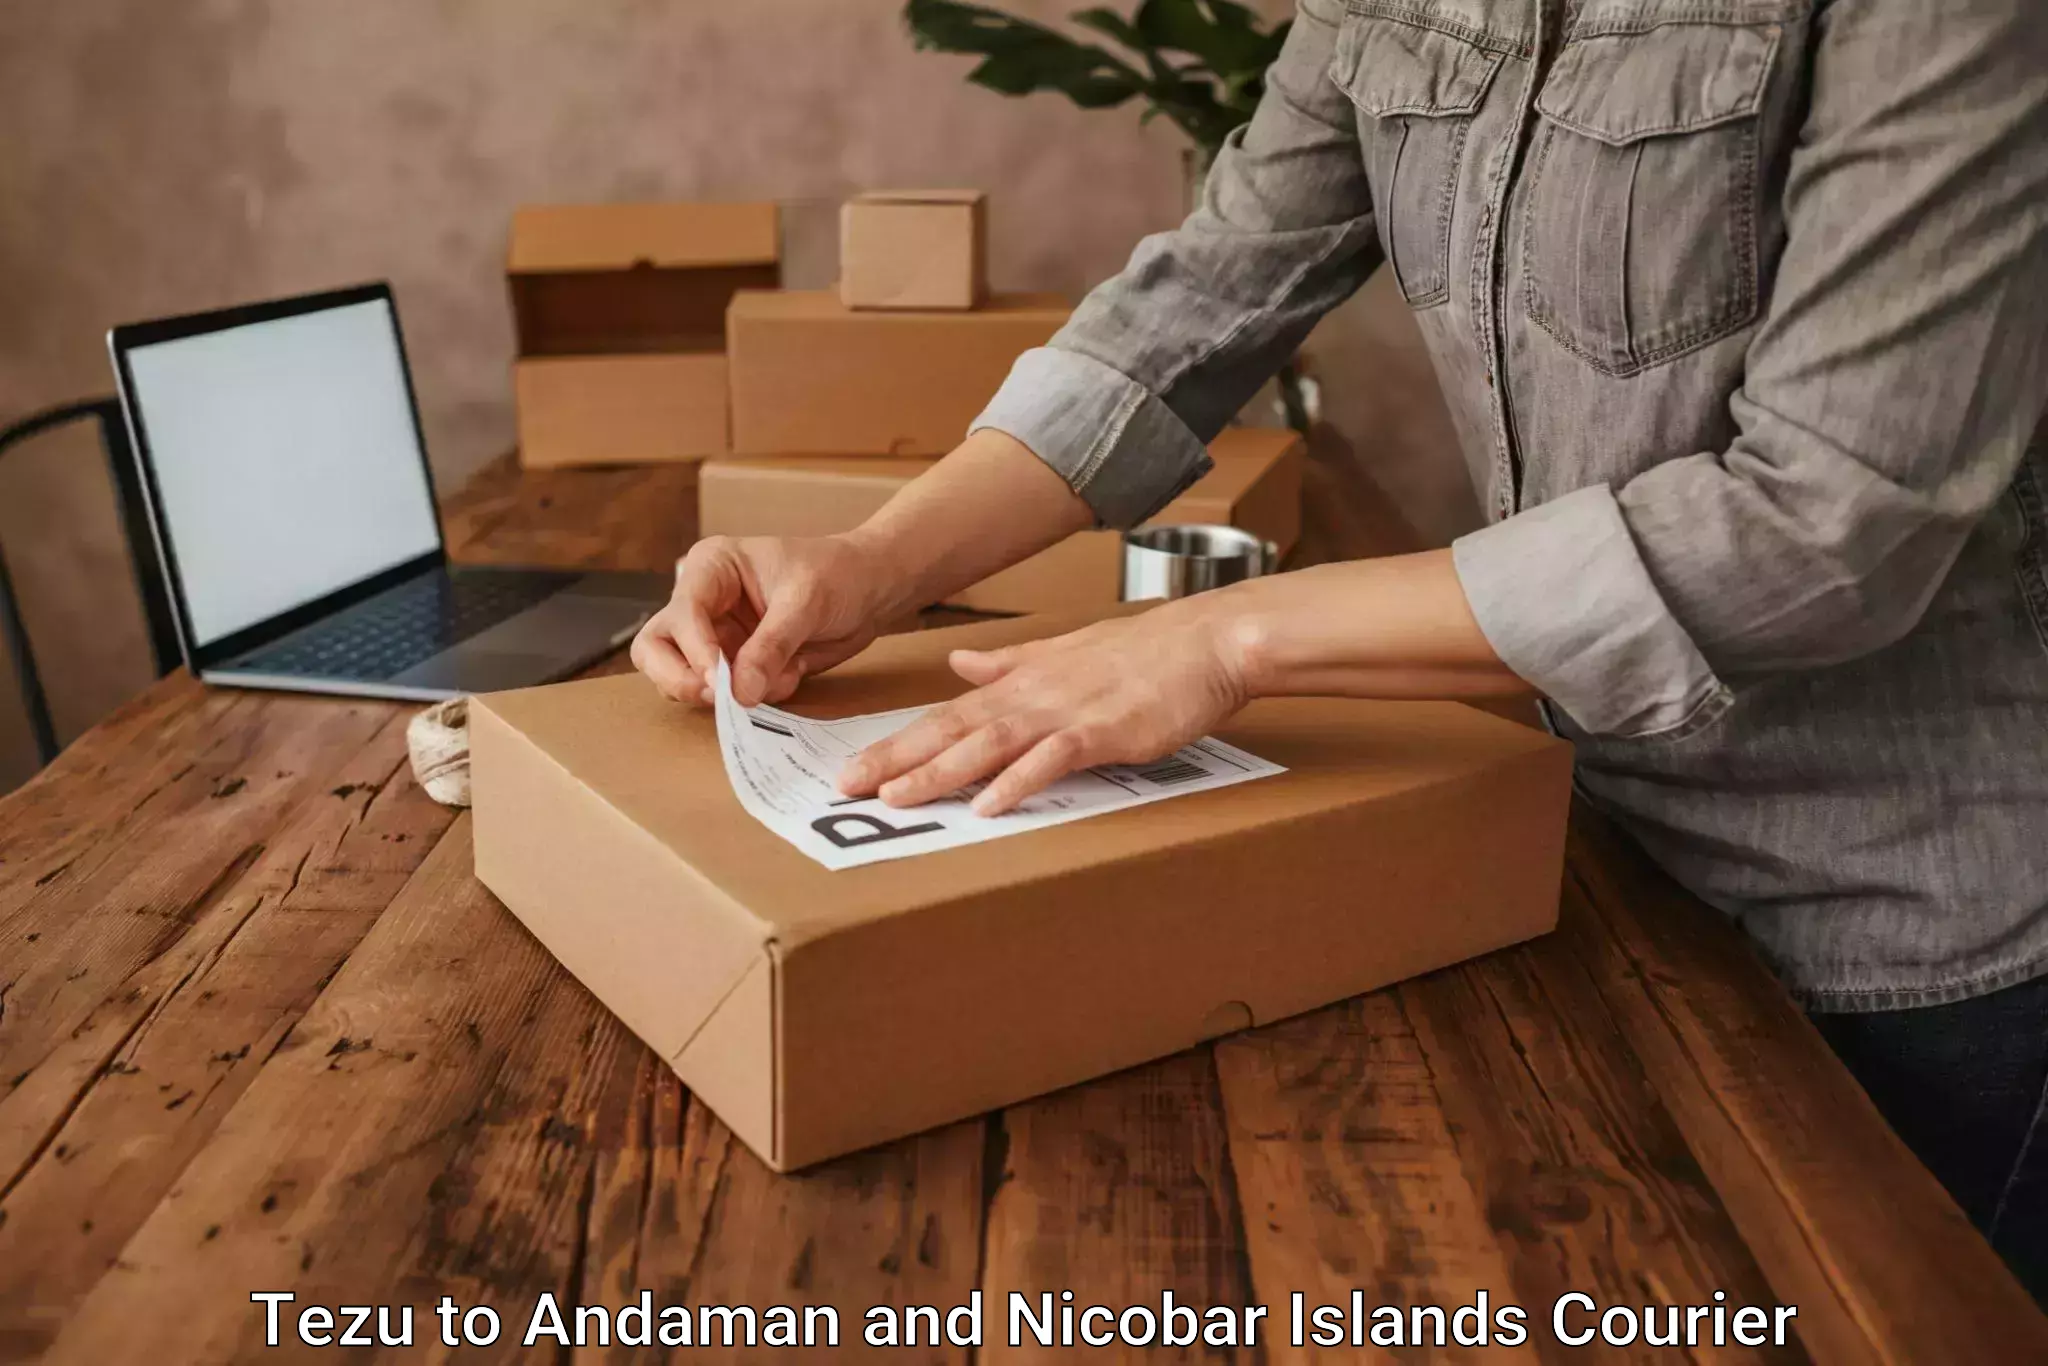 Global courier networks Tezu to Andaman and Nicobar Islands